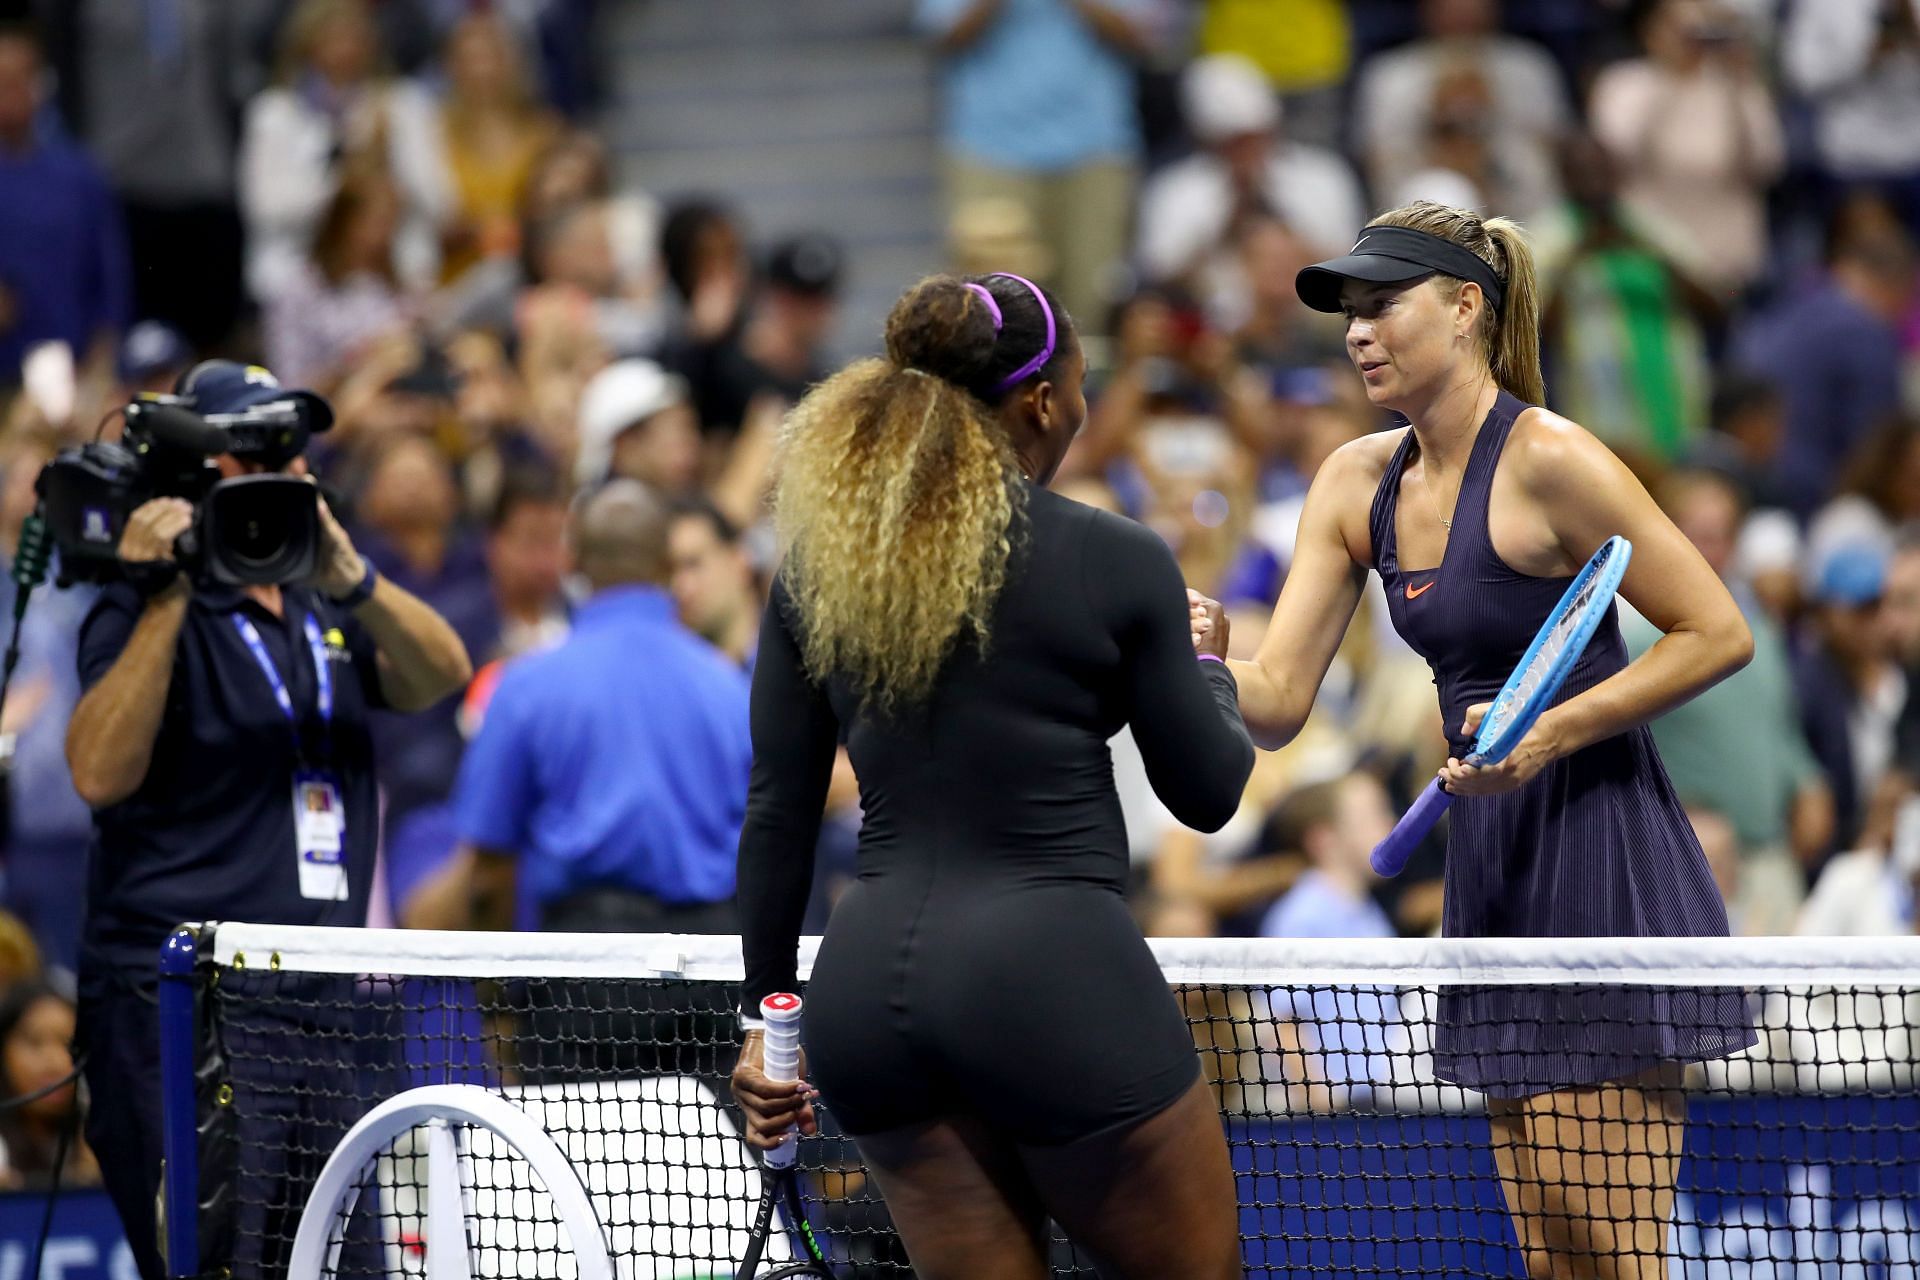 Serena Williams and Maria Sharapova after their match at US Open 2019